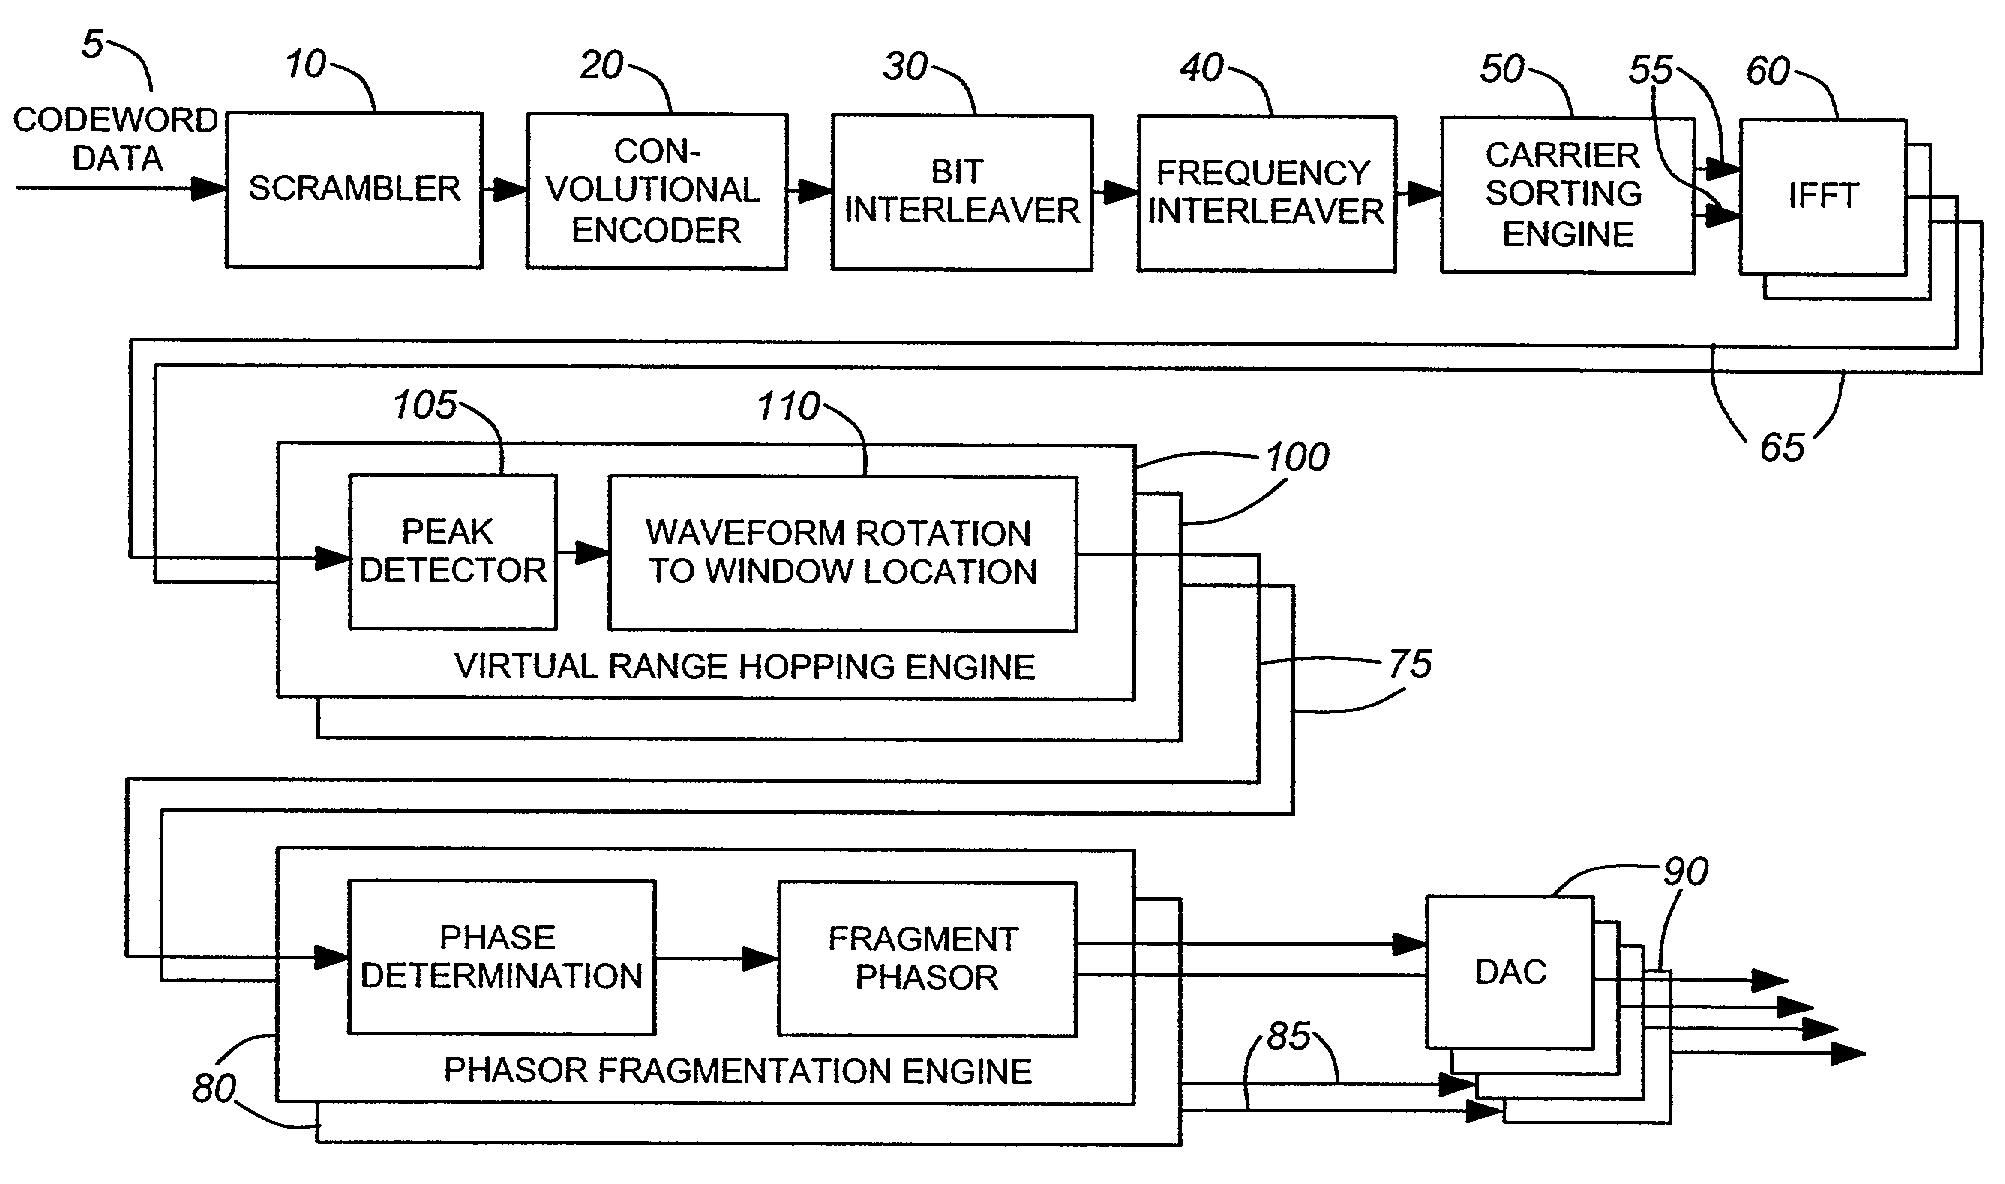 Computational circuits and methods for processing modulated signals having non-constant envelopes